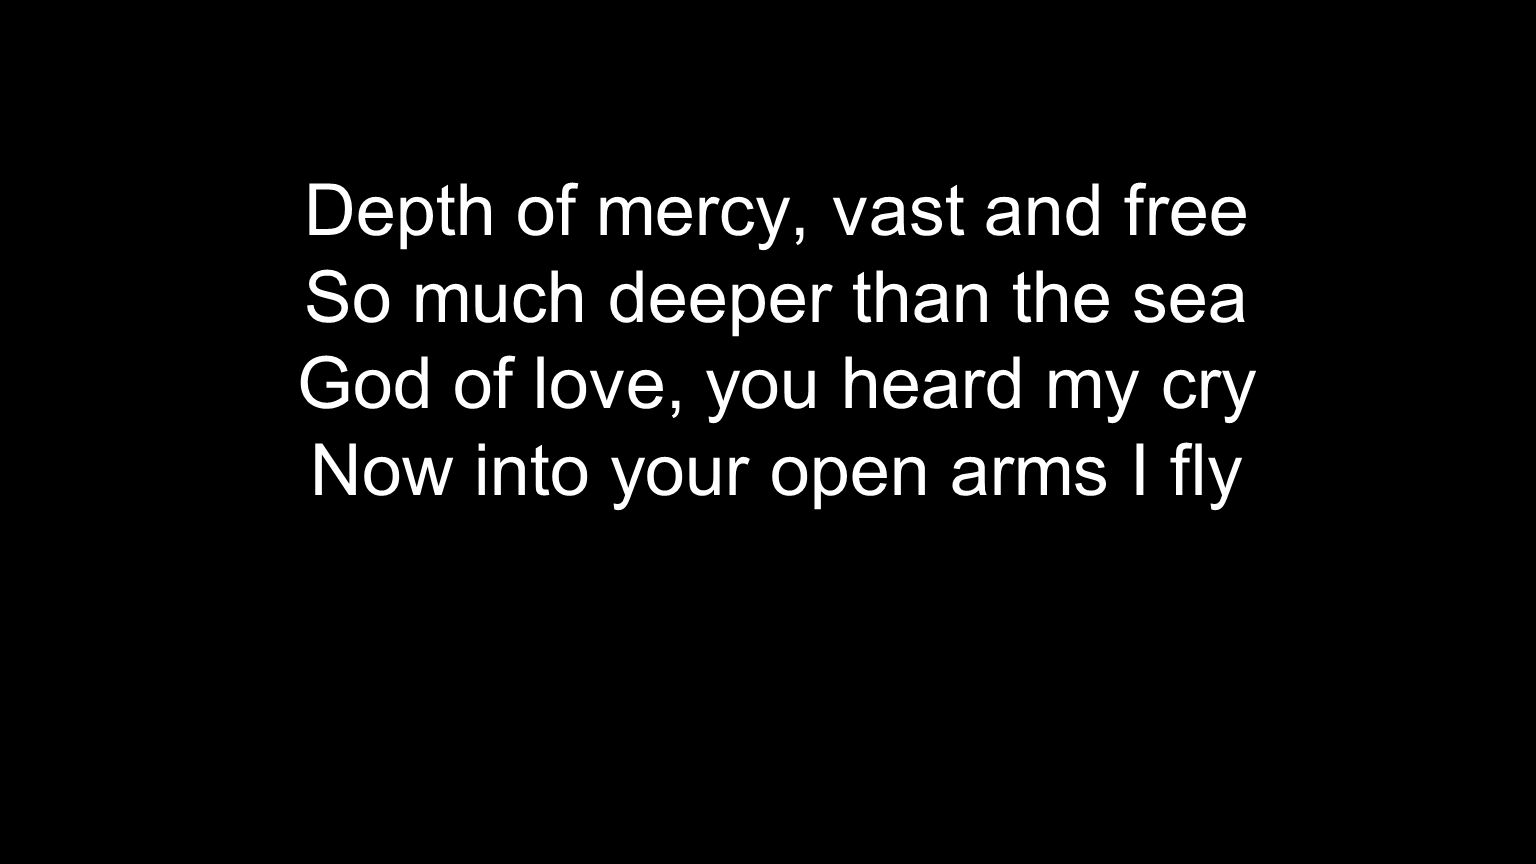 Depth of mercy, vast and free So much deeper than the sea God of love, you heard my cry Now into your open arms I fly